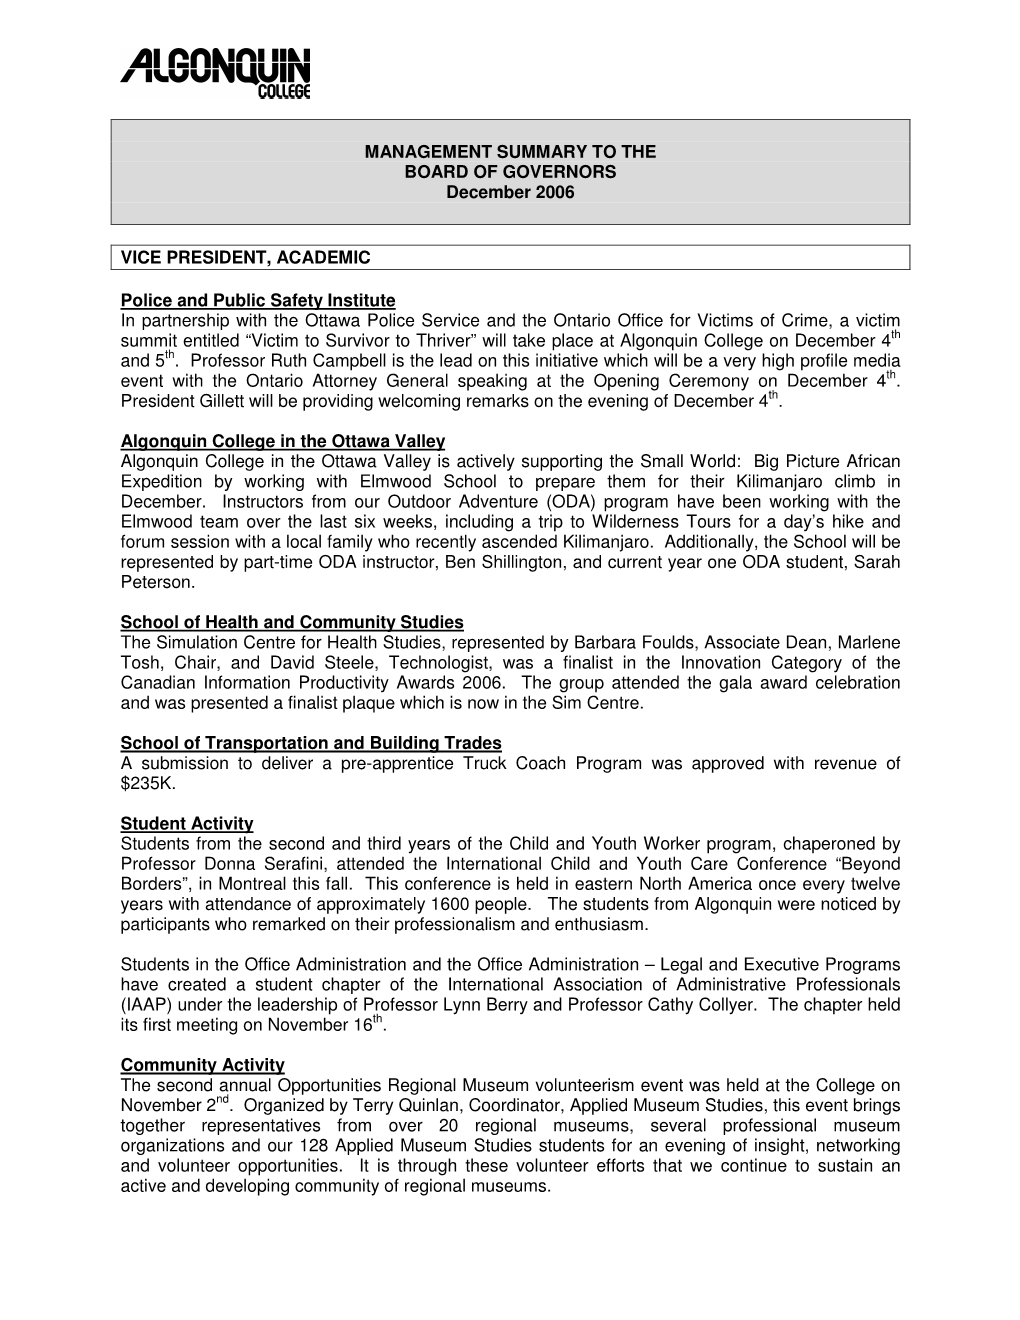 MANAGEMENT SUMMARY to the BOARD of GOVERNORS December 2006